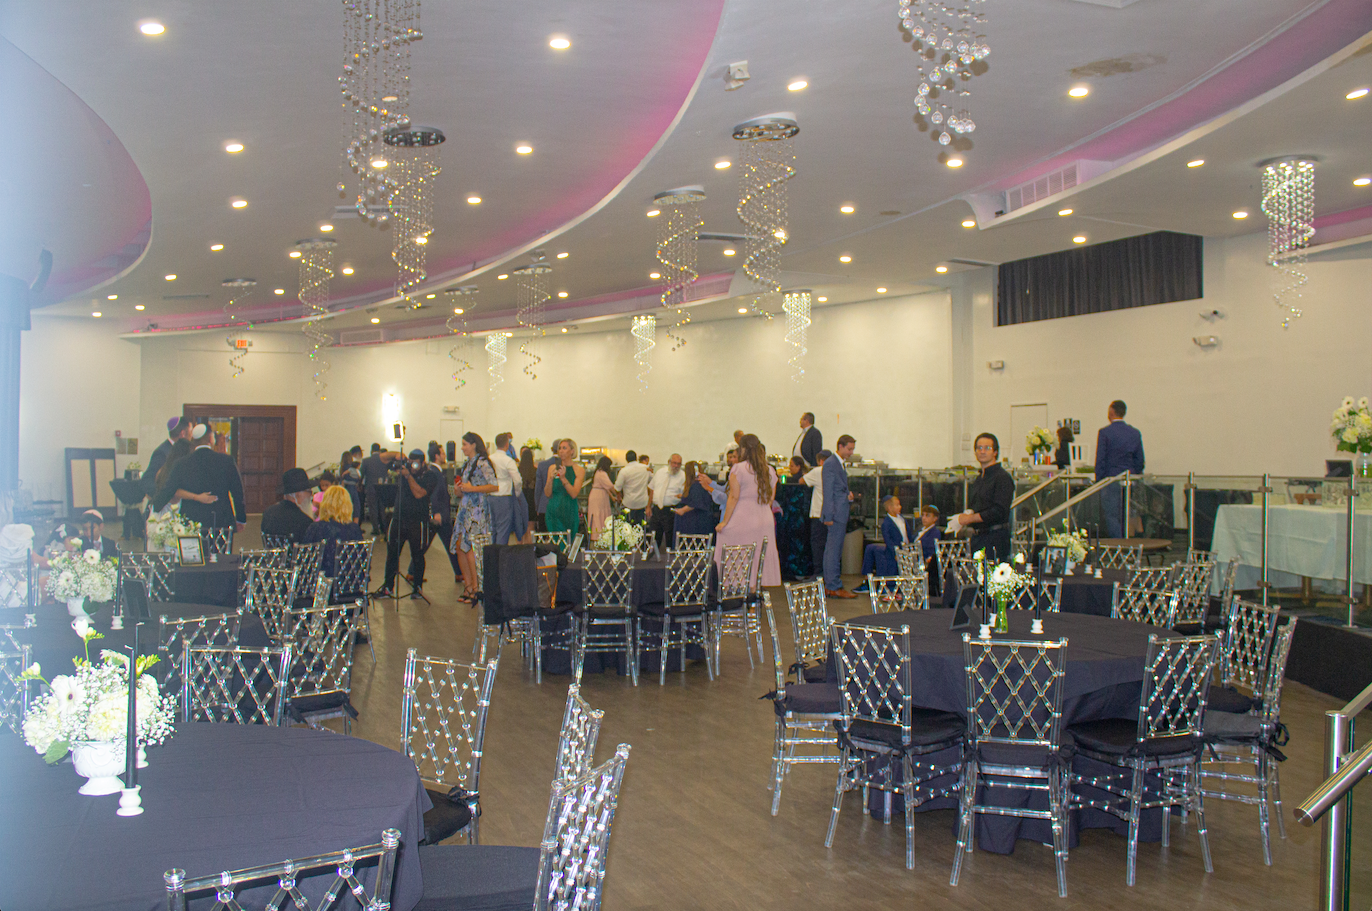 Event space decorated with color globes tables and chairs